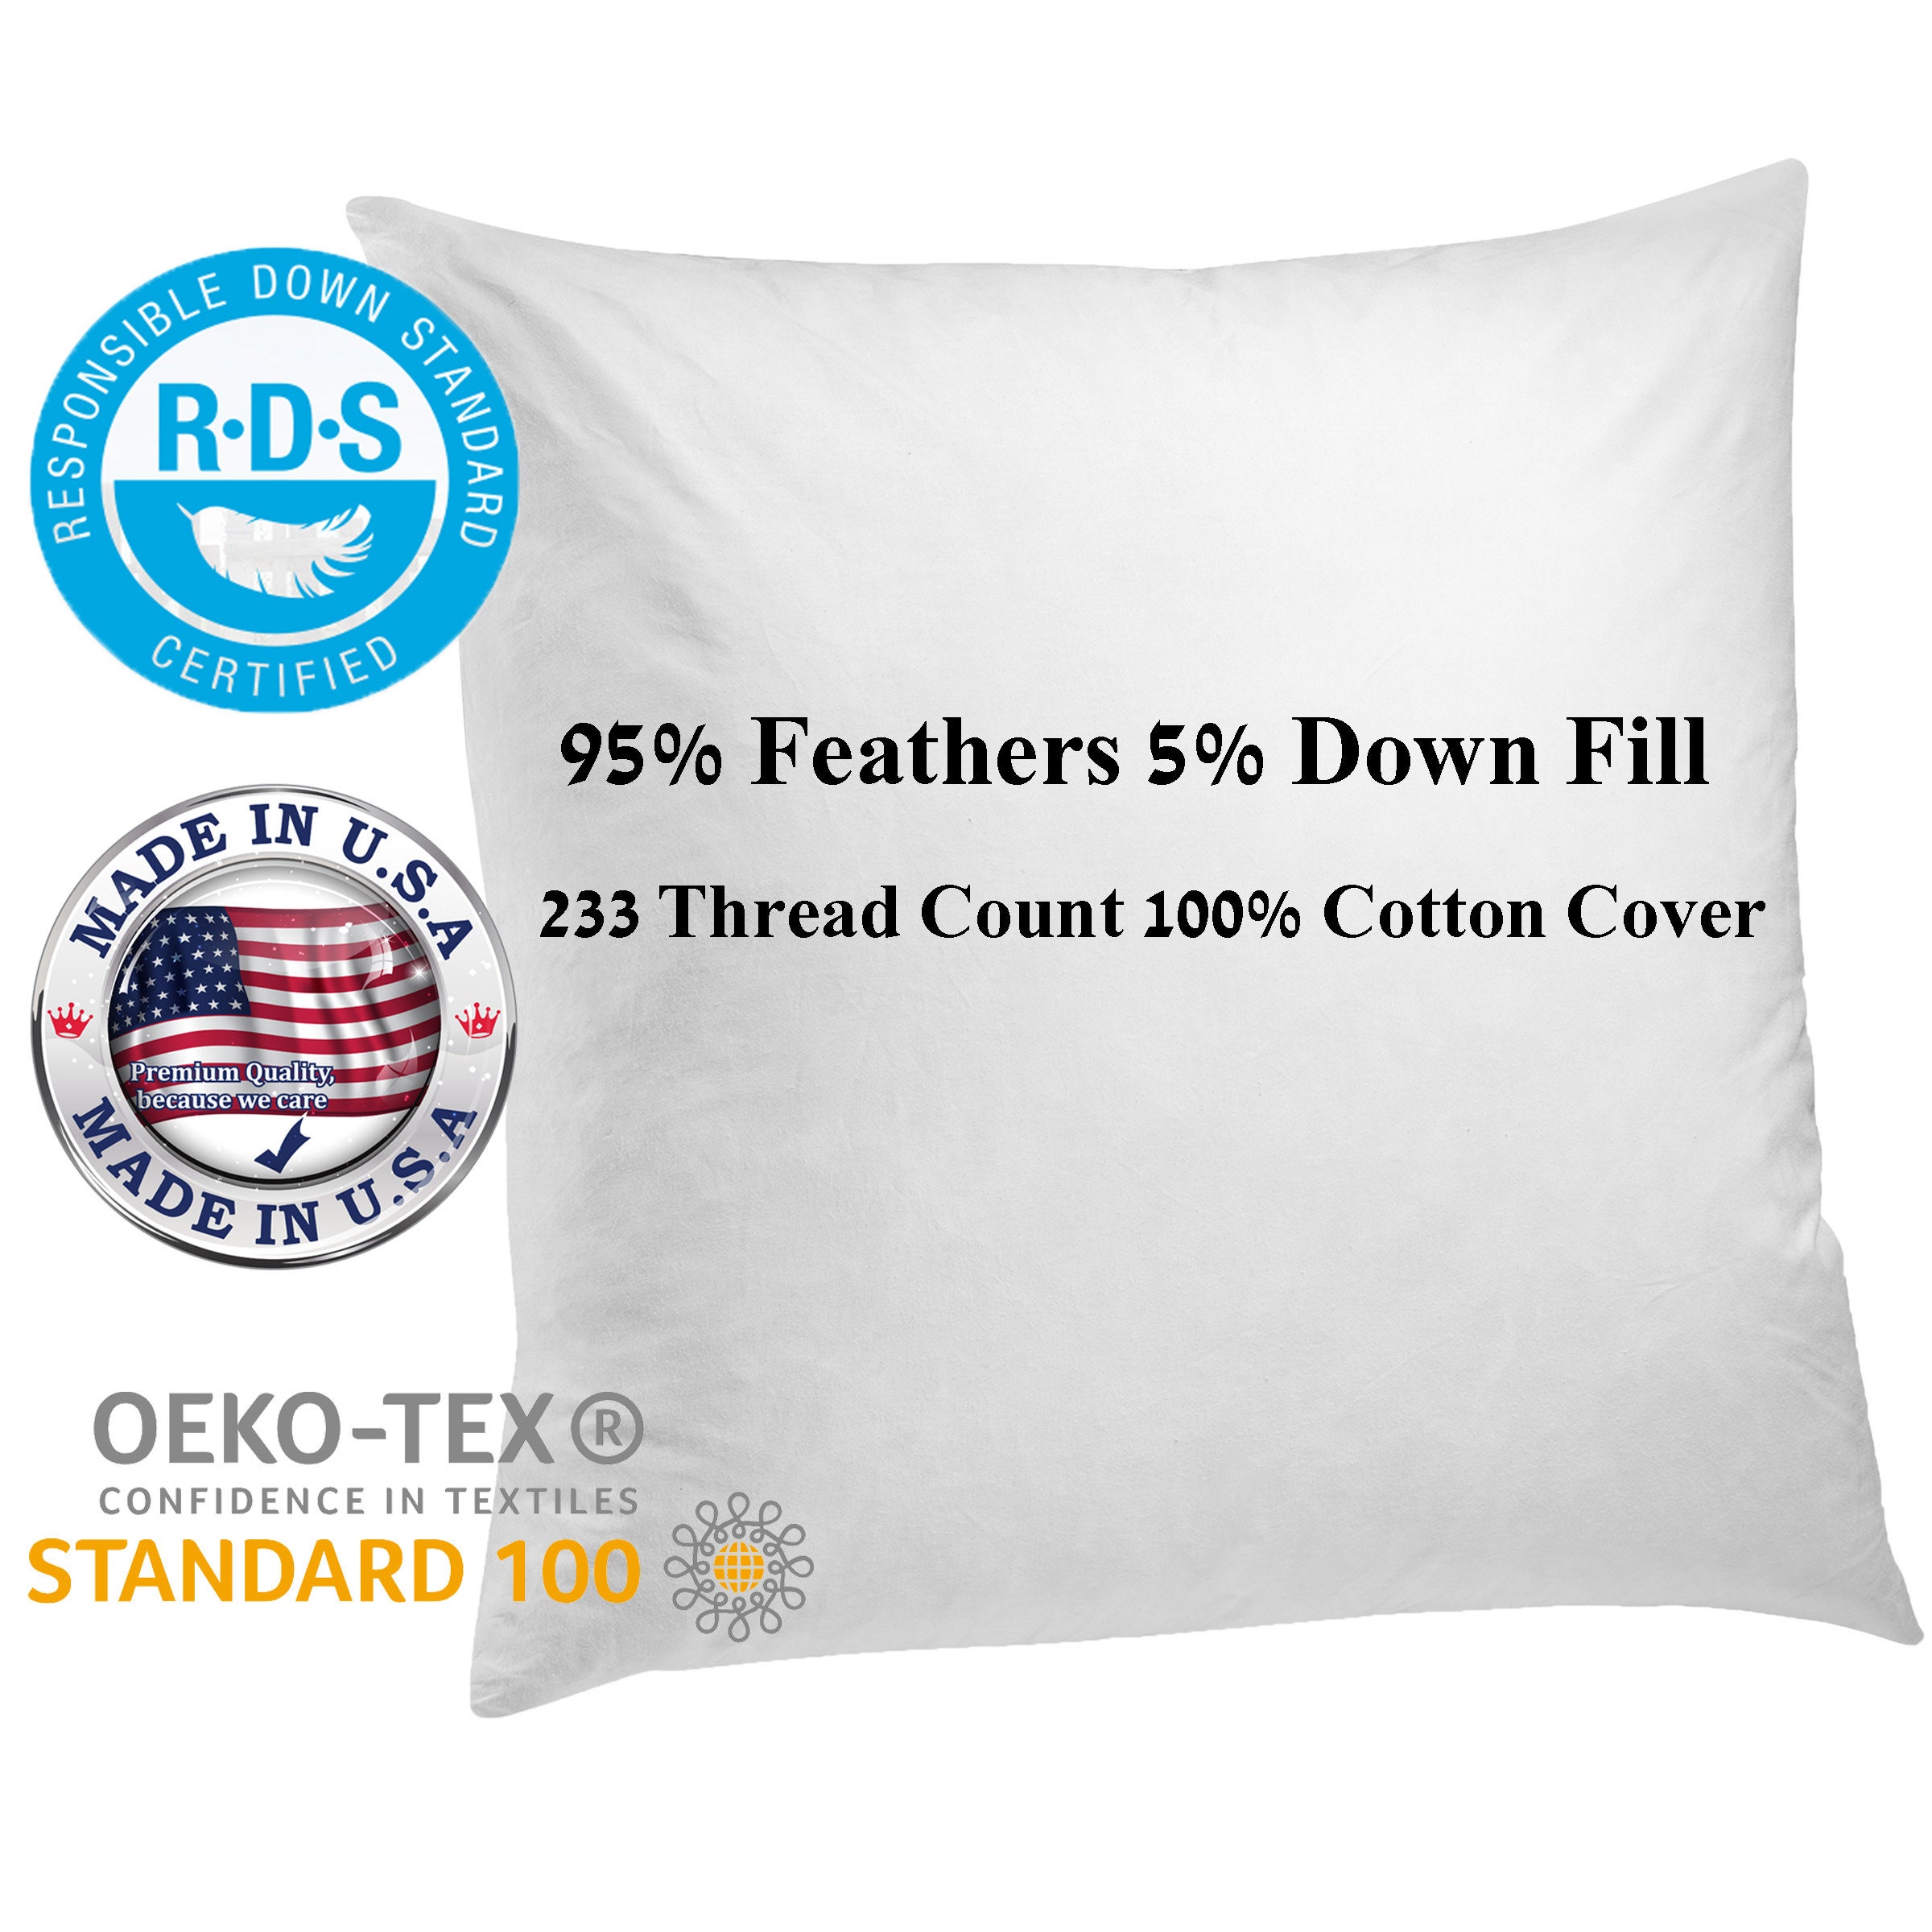 Custom Pillow insert, Goose Down, Goose Feather, 18 x 18 inch filler,  Morrissey Fabric insert, Premium fill, 10% down/90 feathers